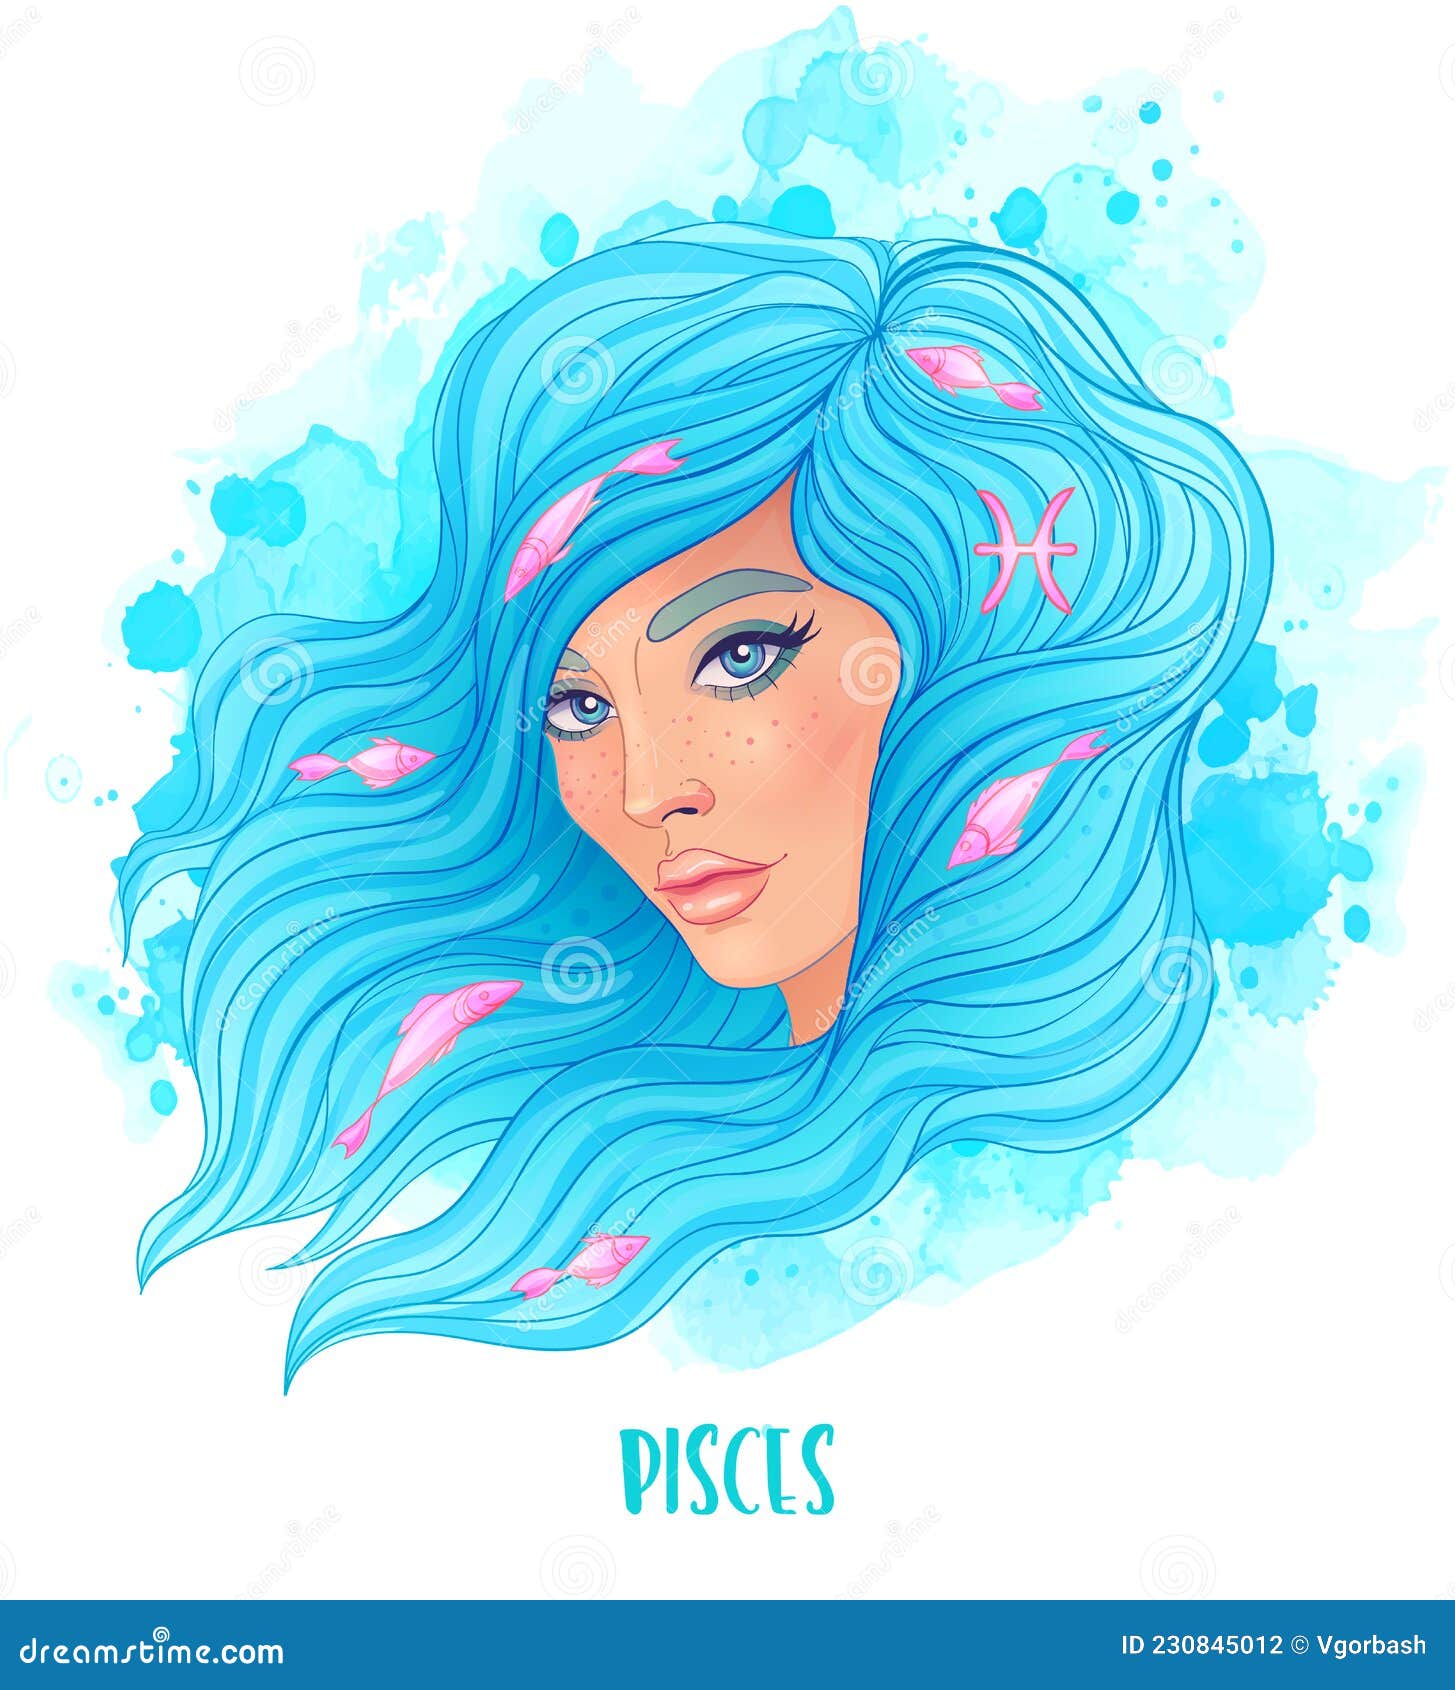 Pisces Astrological Sign As a Beautiful Girl. Vector Illustration Over ...